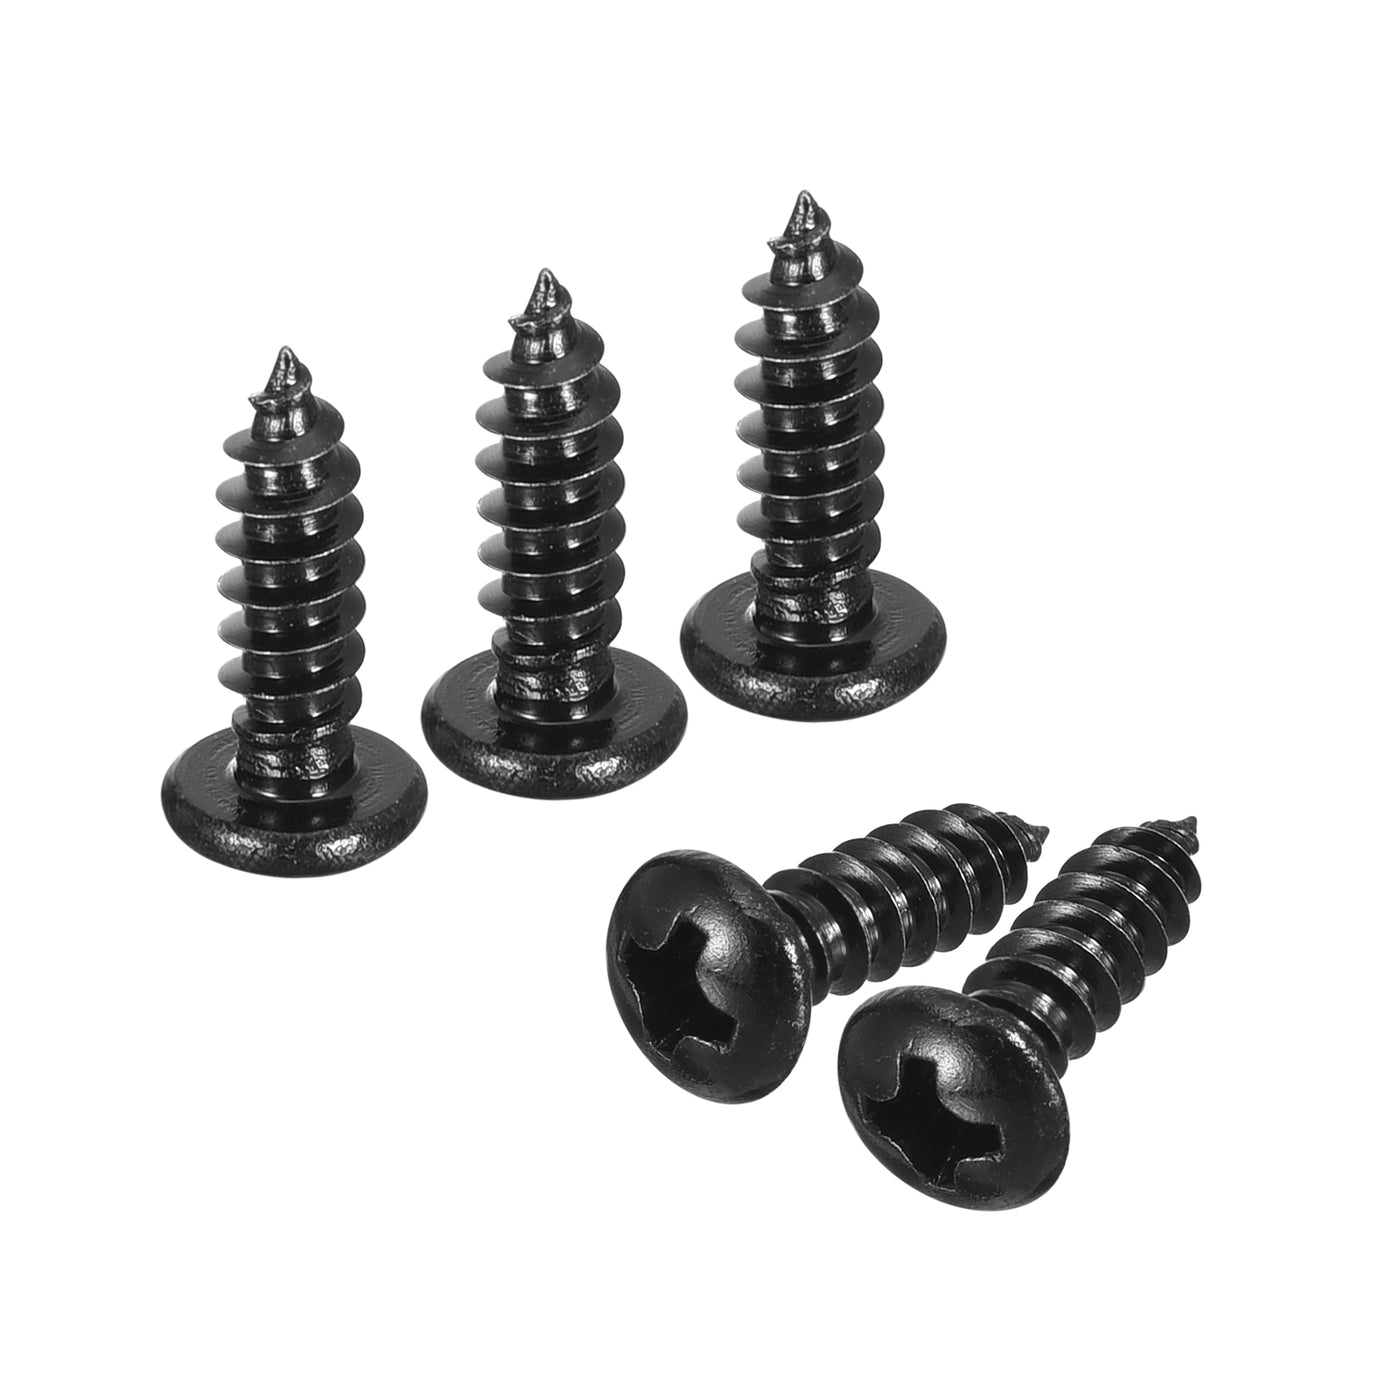 uxcell Uxcell #8 x 1/2" Phillips Pan Head Self-tapping Screw, 50pcs - 304 Stainless Steel Round Head Wood Screw Full Thread (Black)